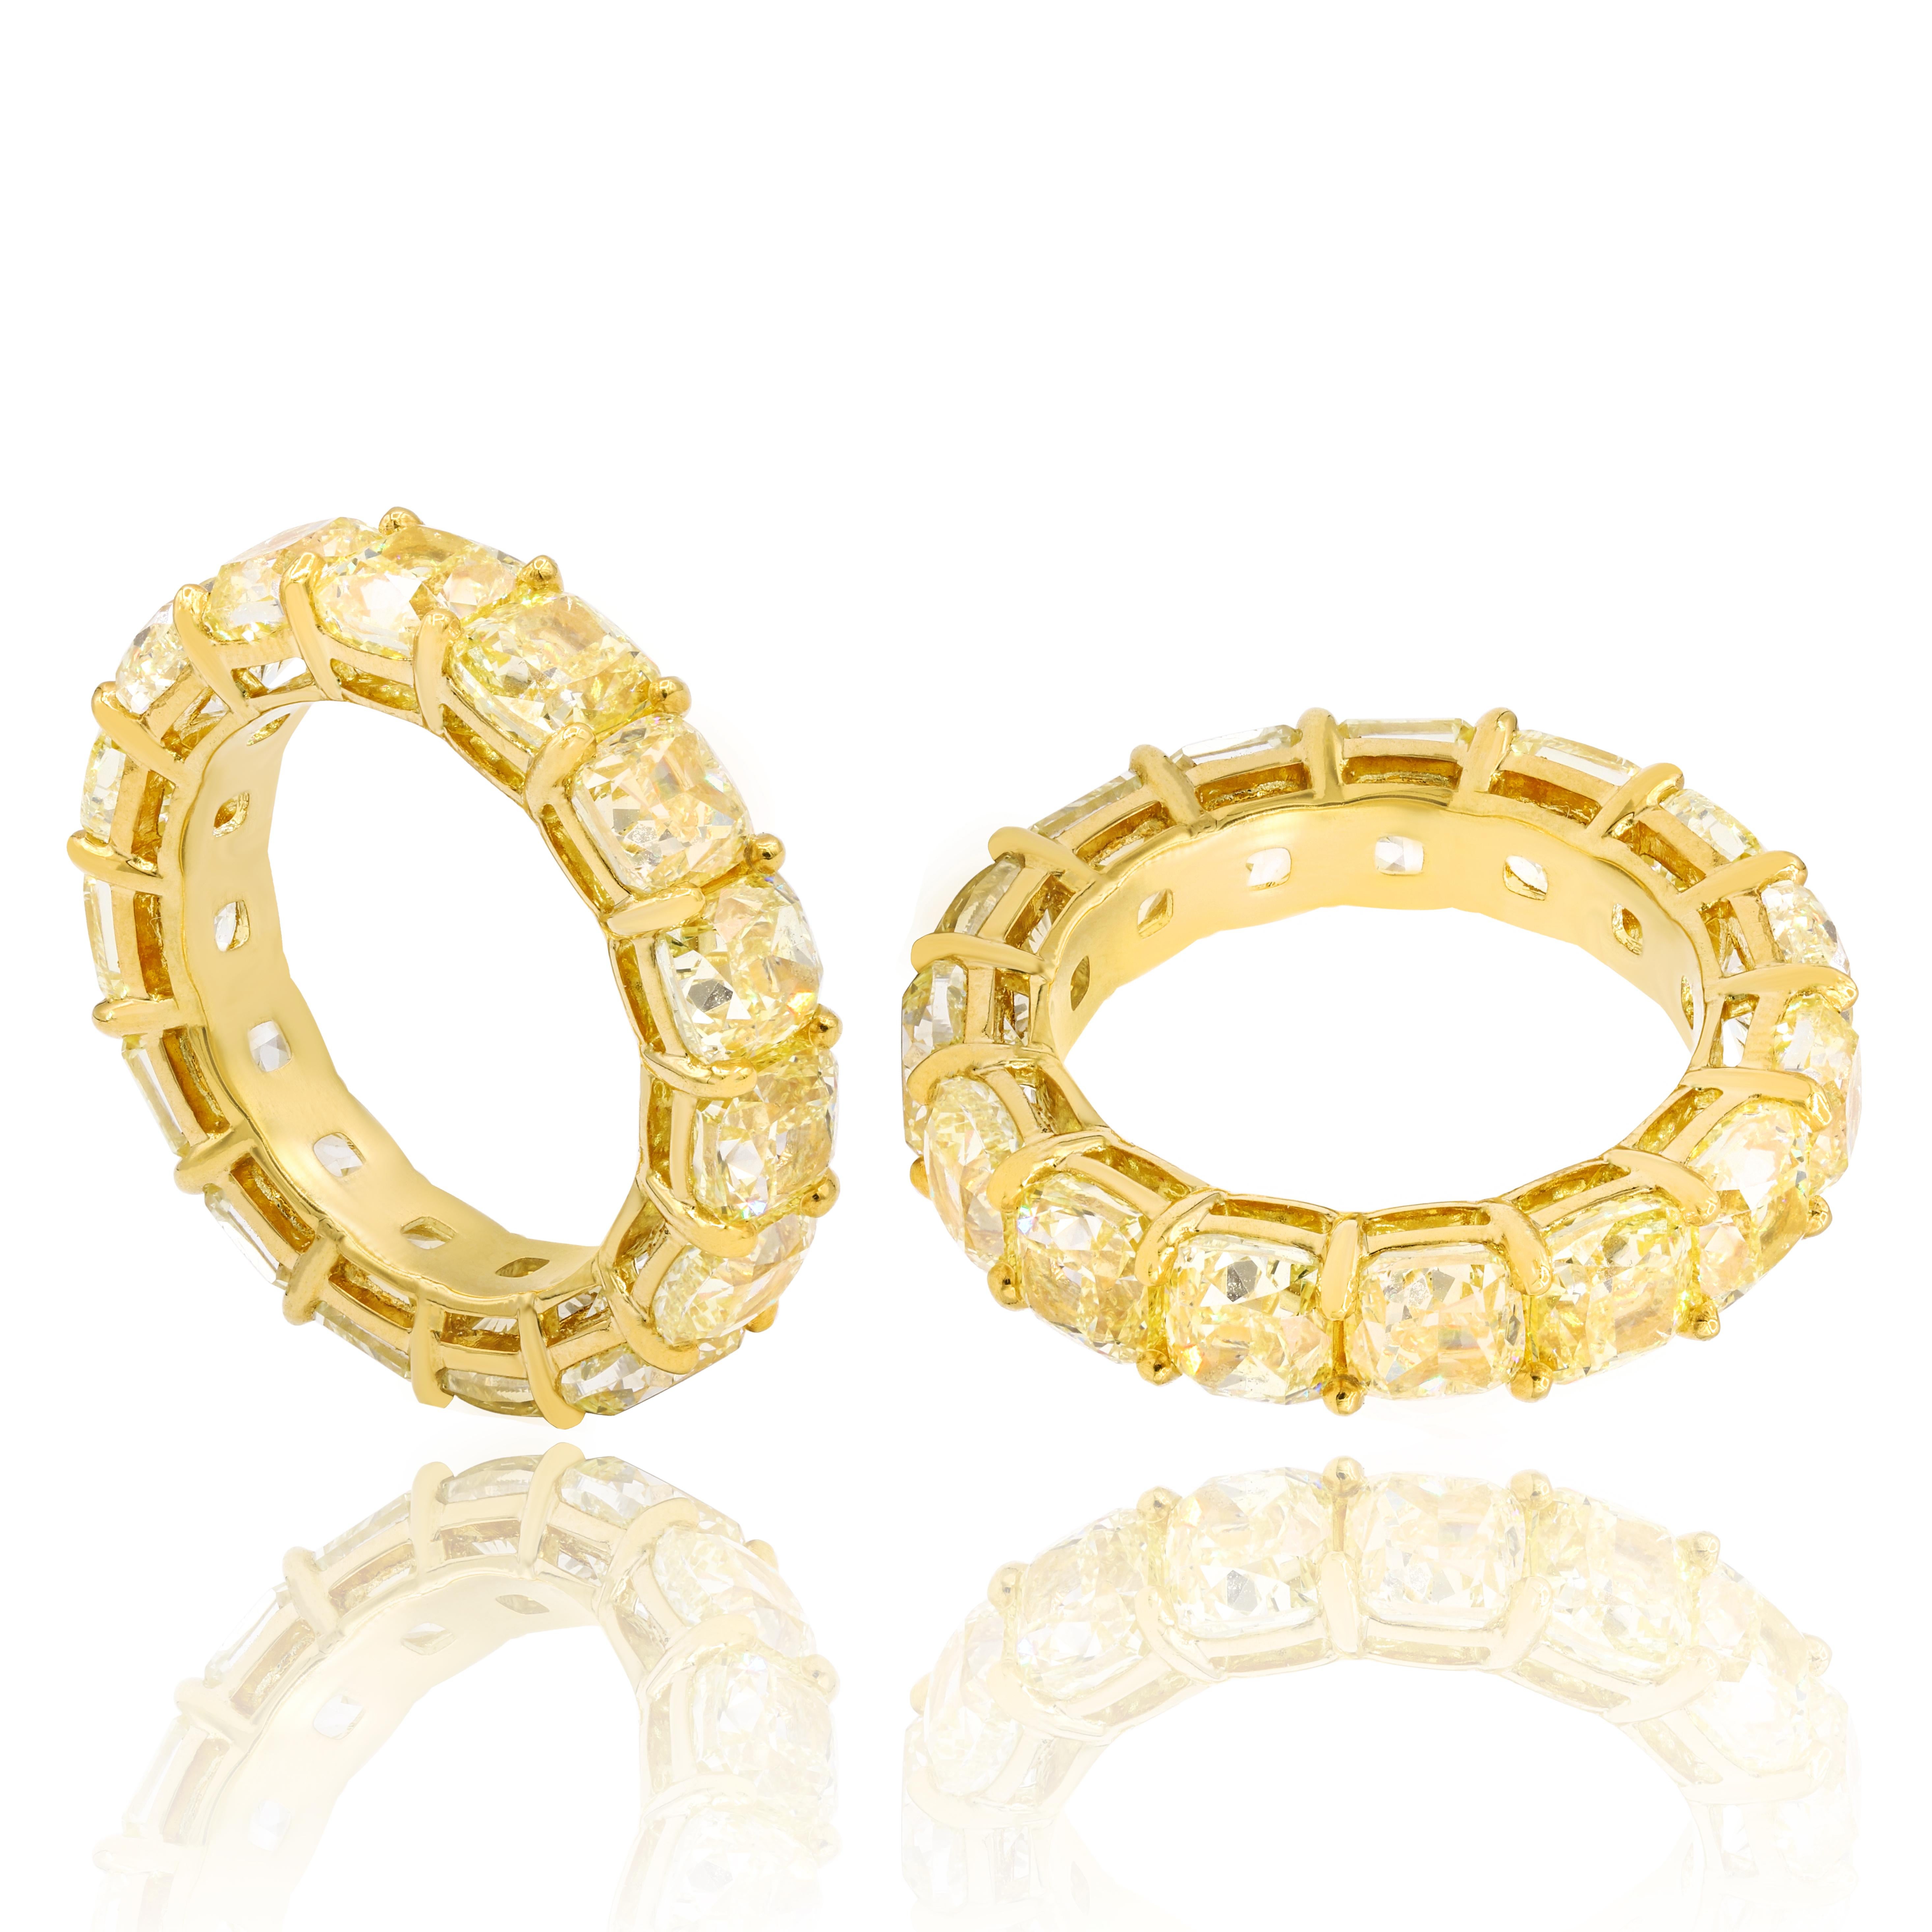 This Canary Yellow Diamond Band, features 10.85 Carats of Yellow Cushion cut diamonds, total 15 stones. Each stone average 0.72 Carats  set in 18K Yellow Gold. Ring size 6
